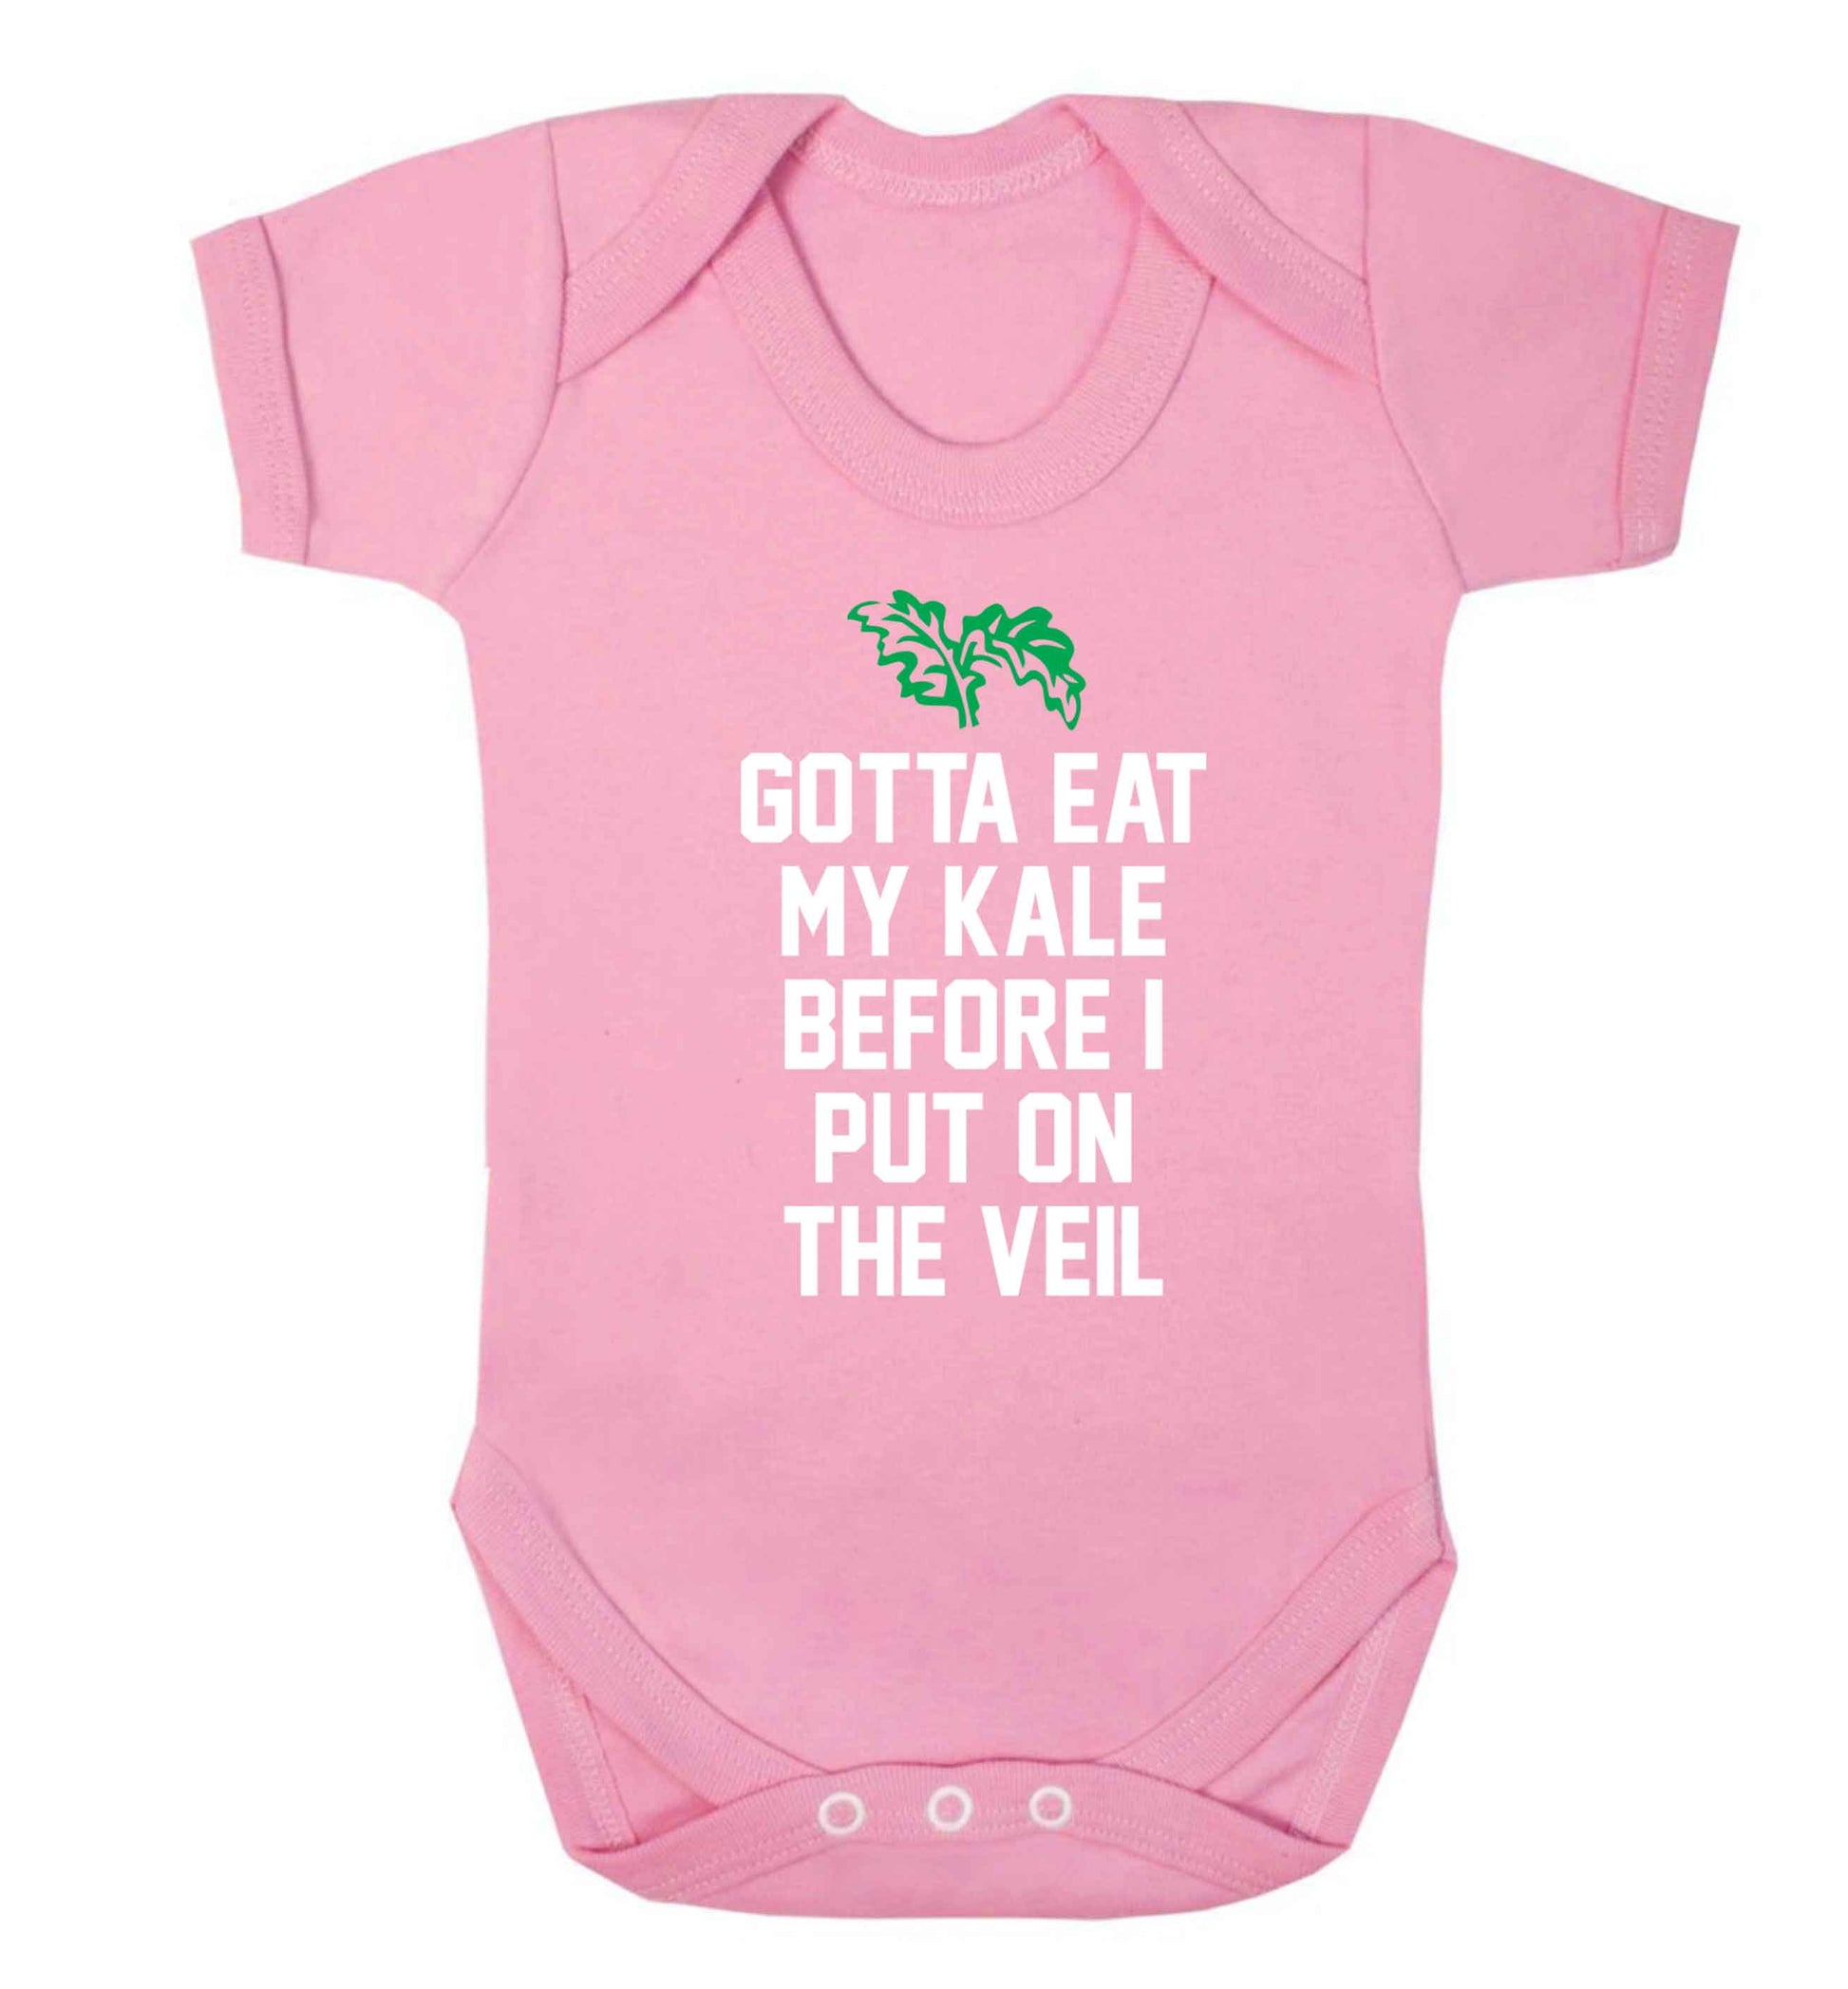 Gotta eat my kale before I put on the veil Baby Vest pale pink 18-24 months